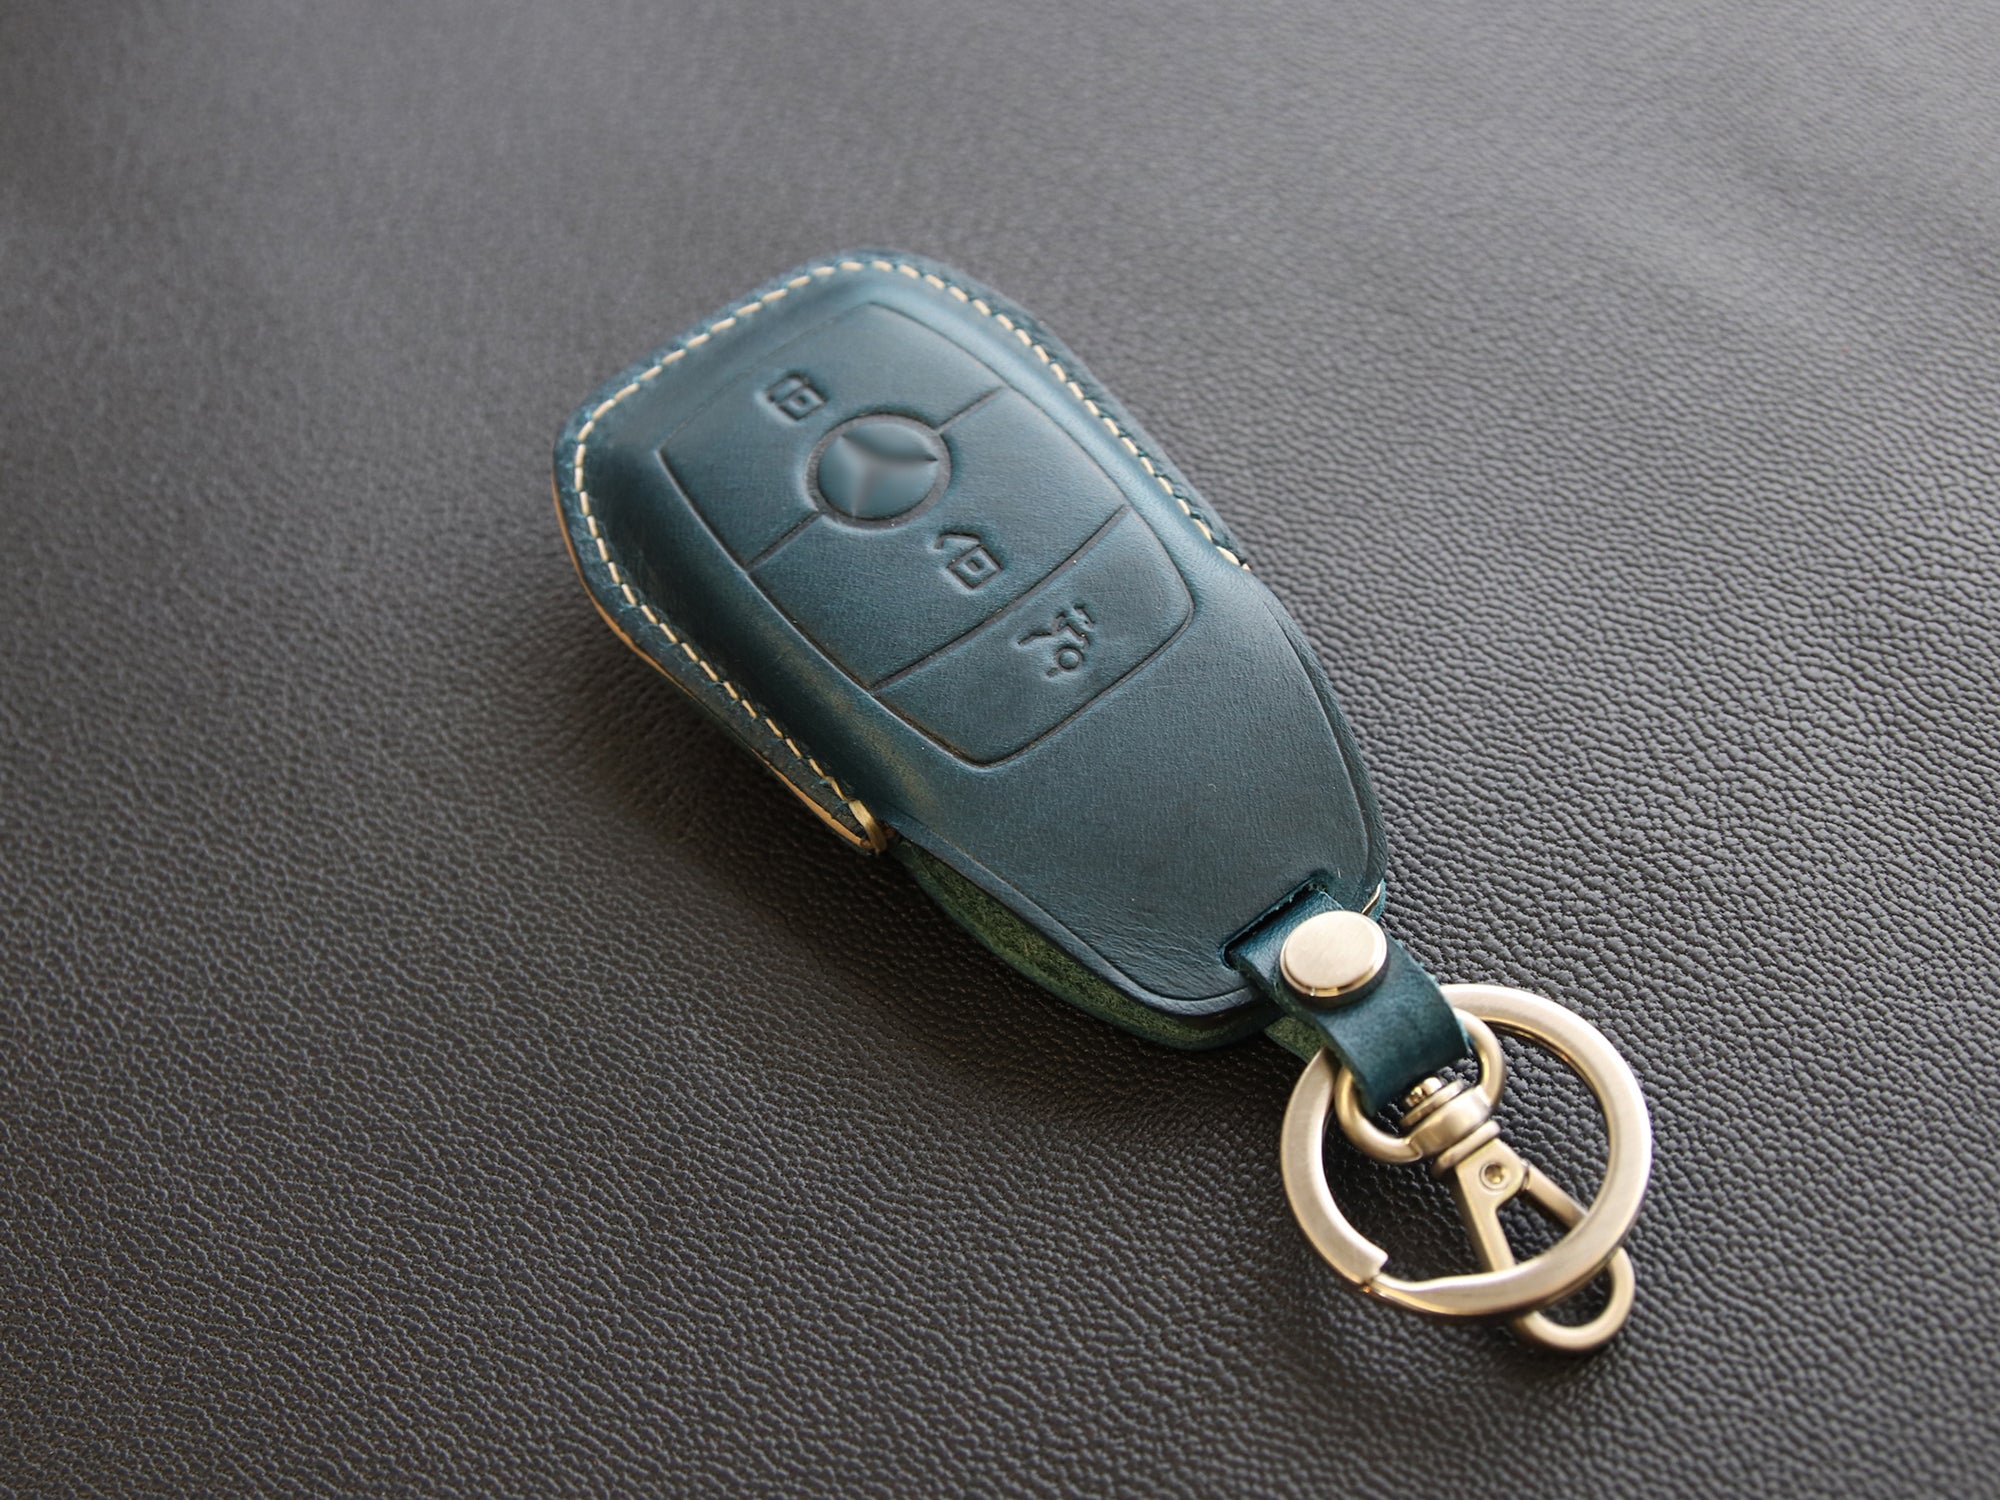 Mercedes Benz [2-3] Key Fob Leather Cover - E Class, S Class, W213, et –  Leather Brut